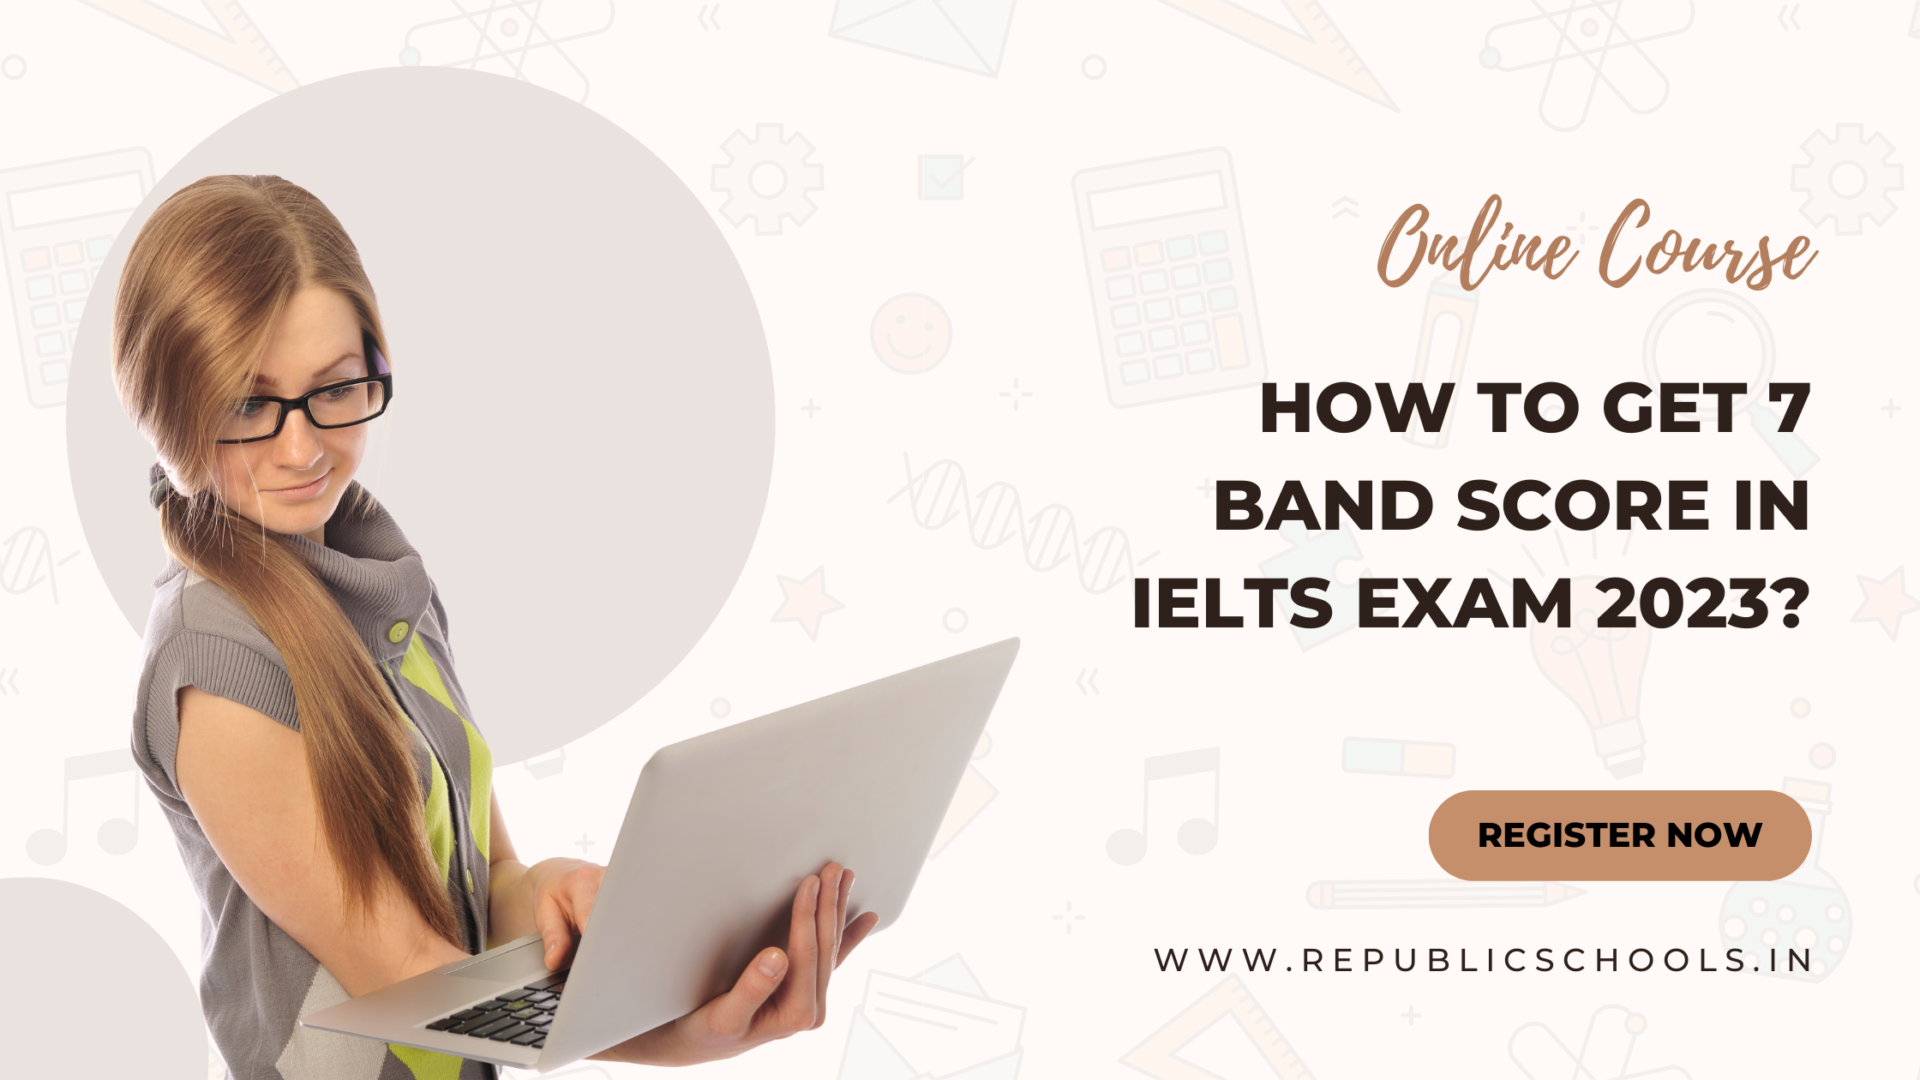 How To Get 7 Band Score In IELTS Exam 2023?